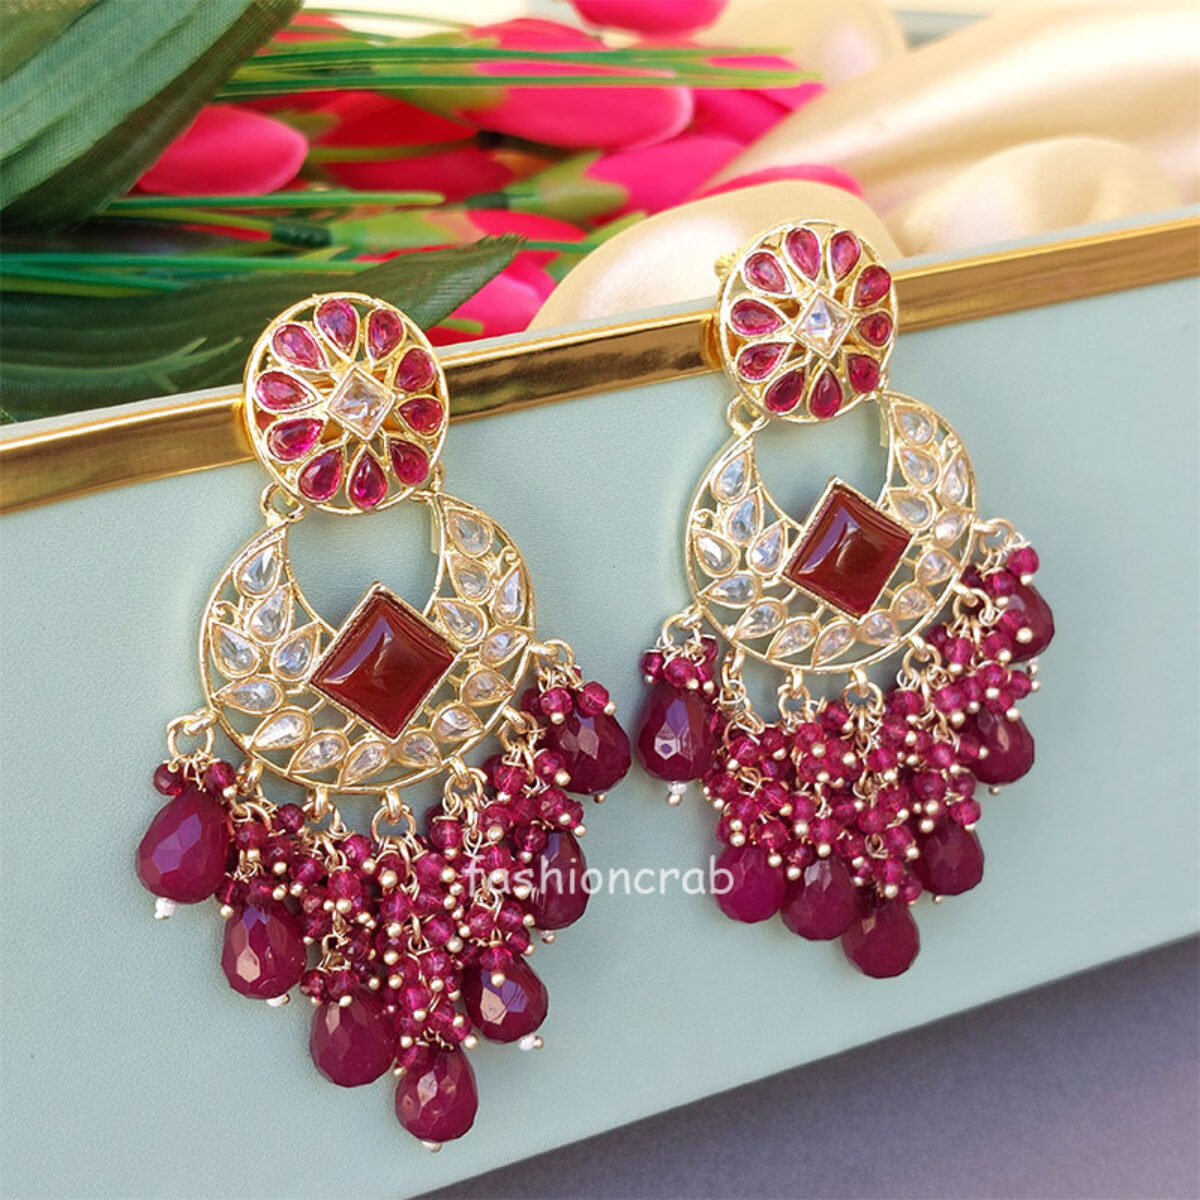 Latest Gold Earrings Designs With Weight And Price|| Tanisha Jewellers -  YouTube | Gold earrings designs, Gold earrings with price, Latest earrings  design